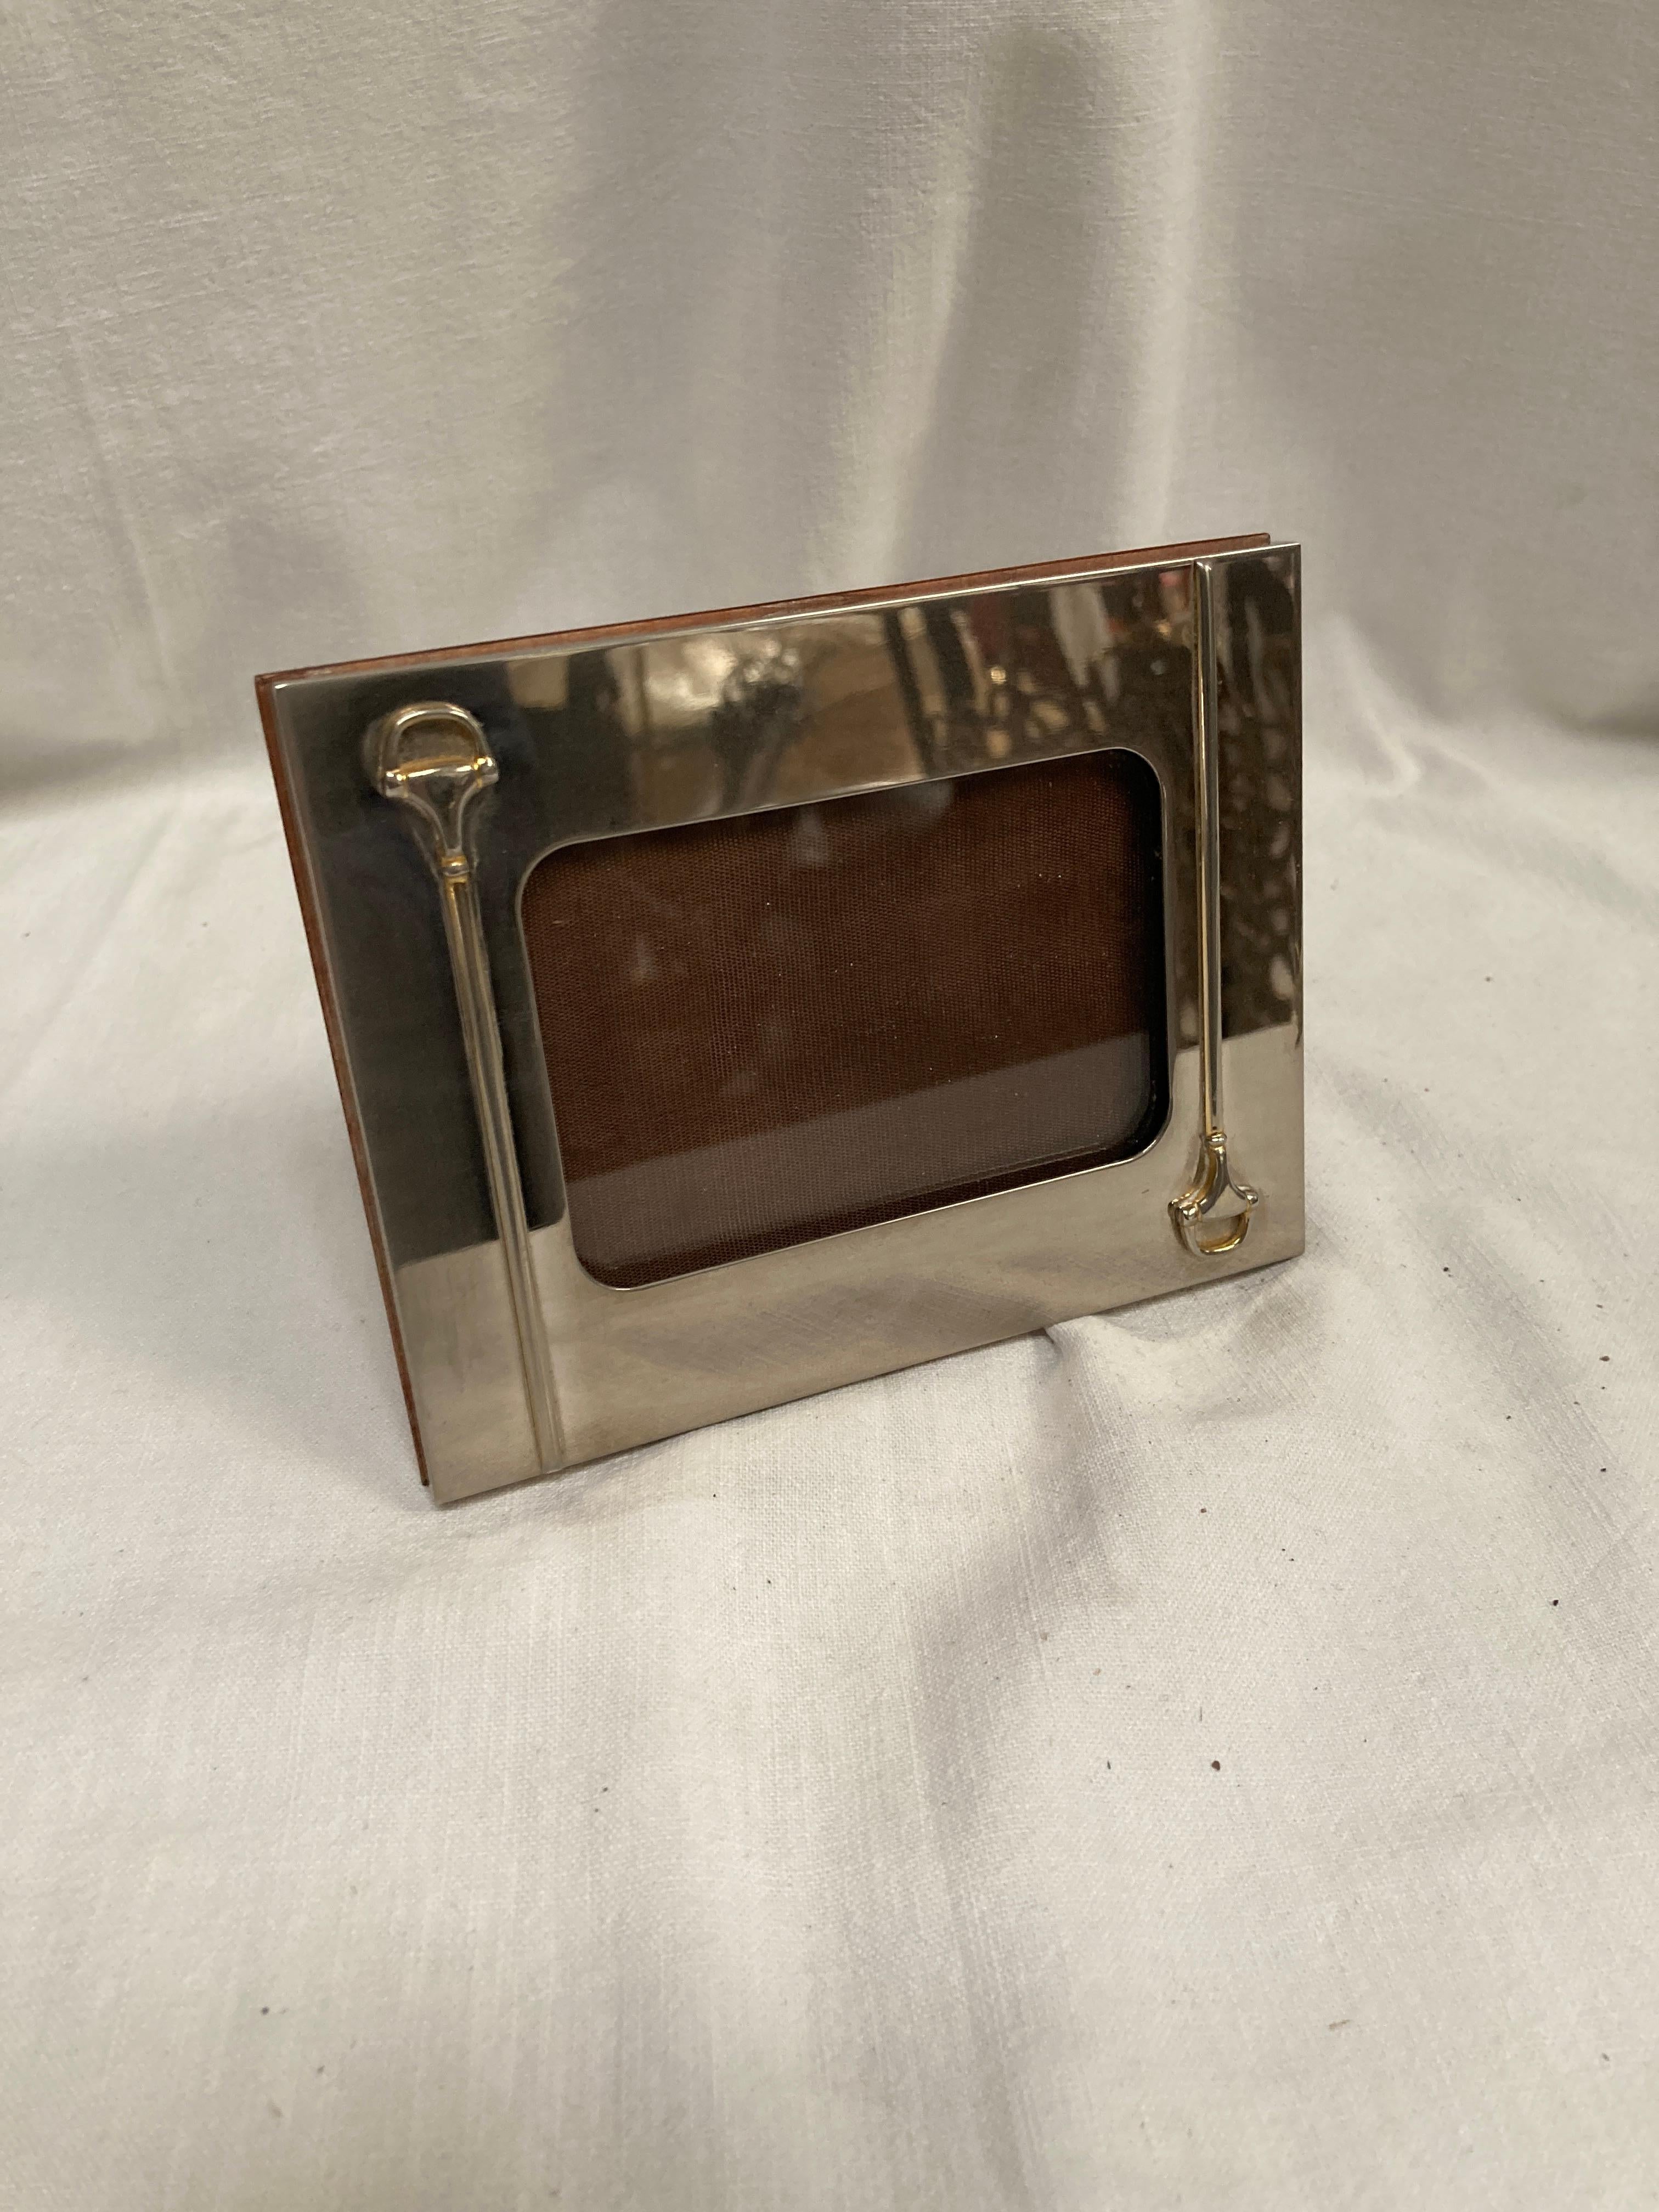 1970's Silver plated picture frame by Gucci
Great quality 
Rare vintage piece